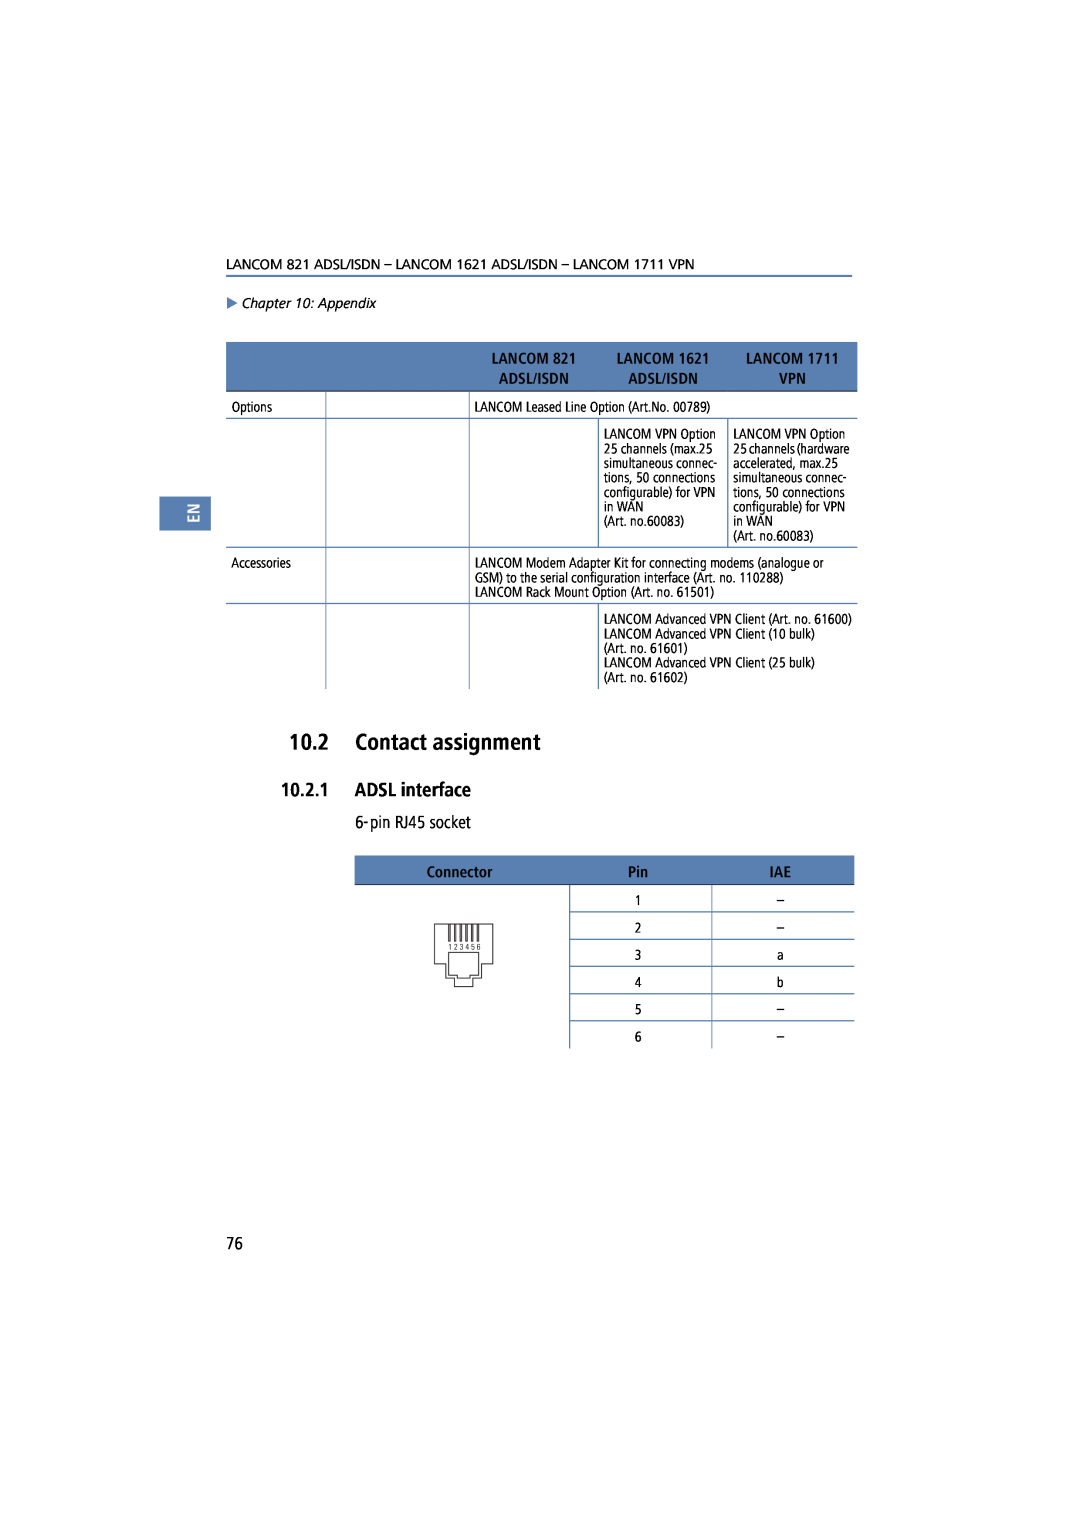 Lancom Systems 1711, 821, 1621 manual Contact assignment, ADSL interface, Lancom, Adsl/Isdn, Connector 